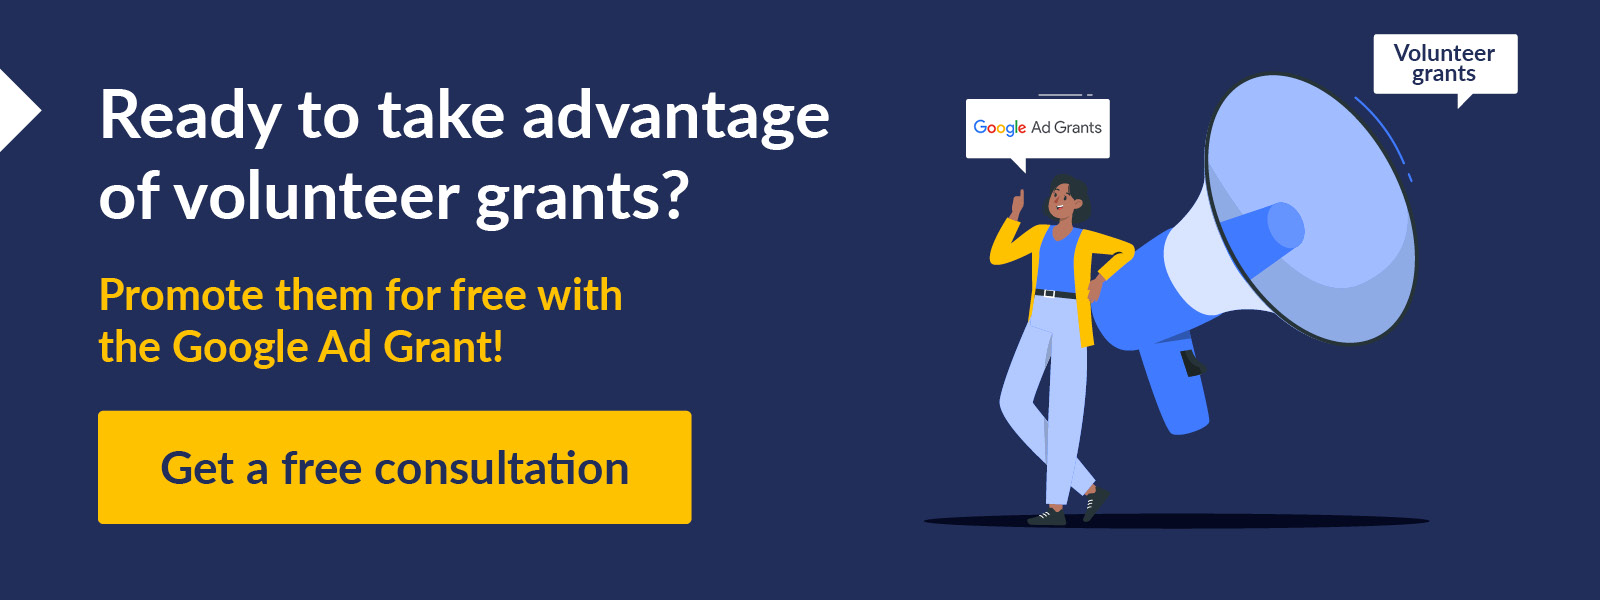 Click through to set up a free consultation with Getting Attention and learn how the Google Ad Grant can help you promote volunteer grants.